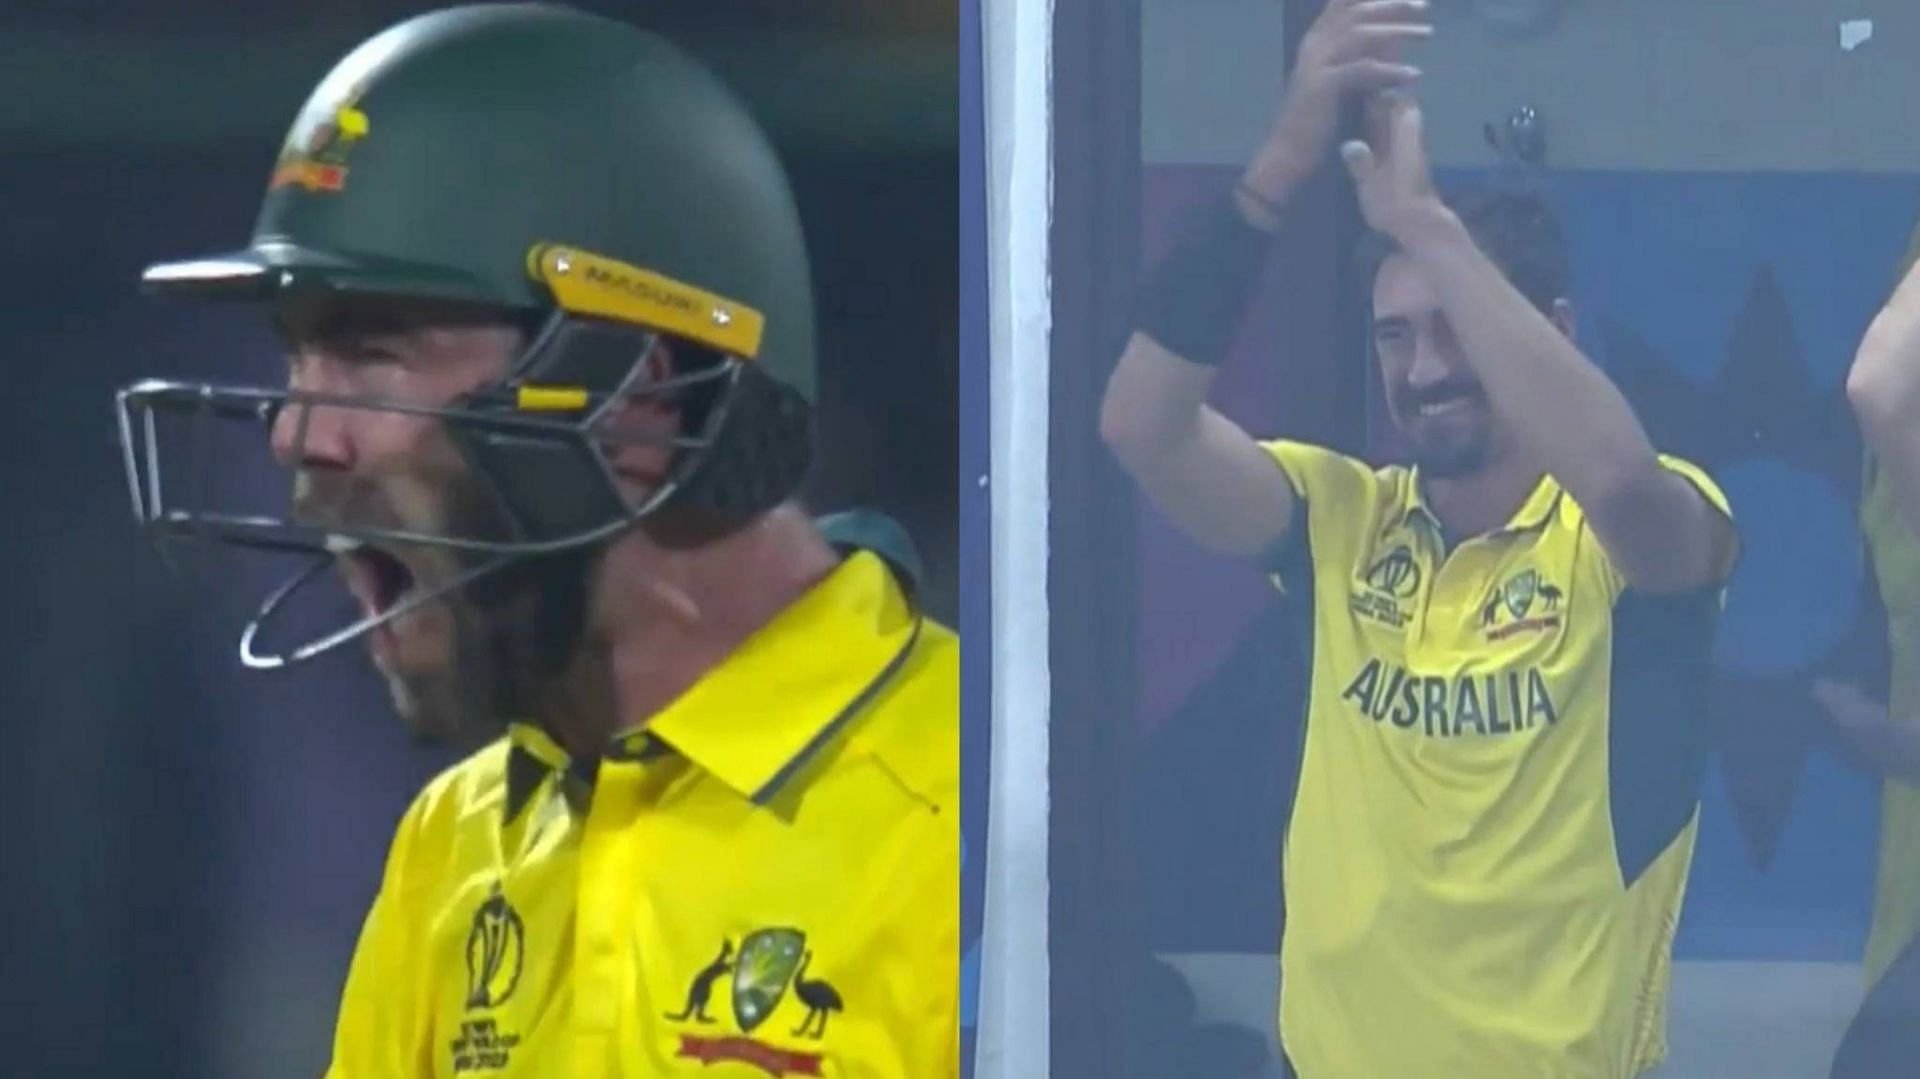 Mitchell Starc lauded Glenn Maxwell for his 100 (Image: ICC/Facebook)